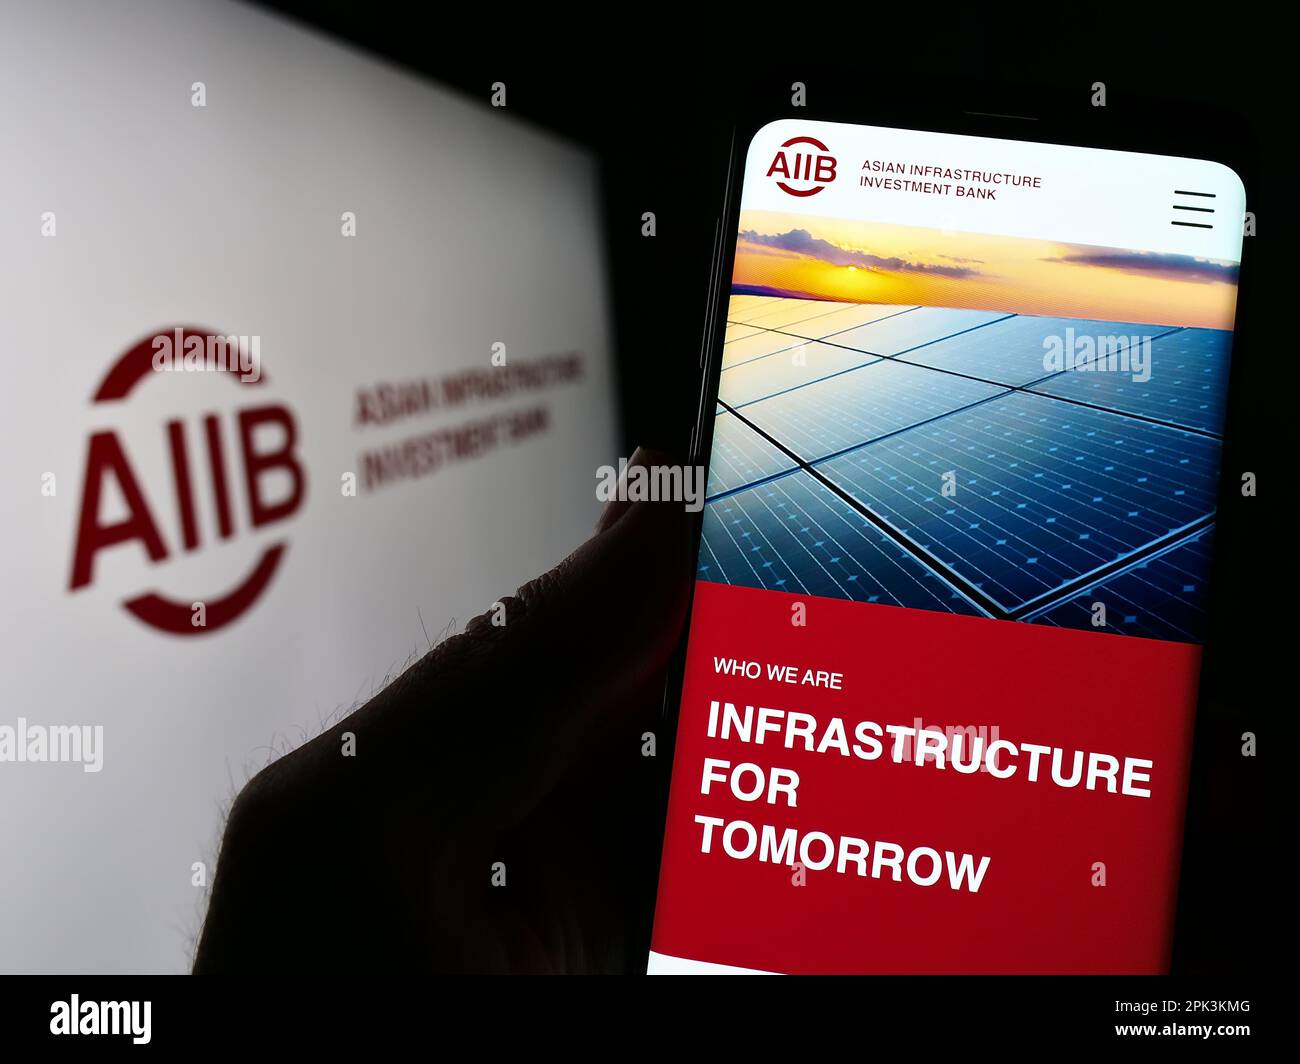 Person holding cellphone with logo of Asian Infrastructure Investment Bank (AIIB) on screen in front of business webpage. Focus on phone display. Stock Photo